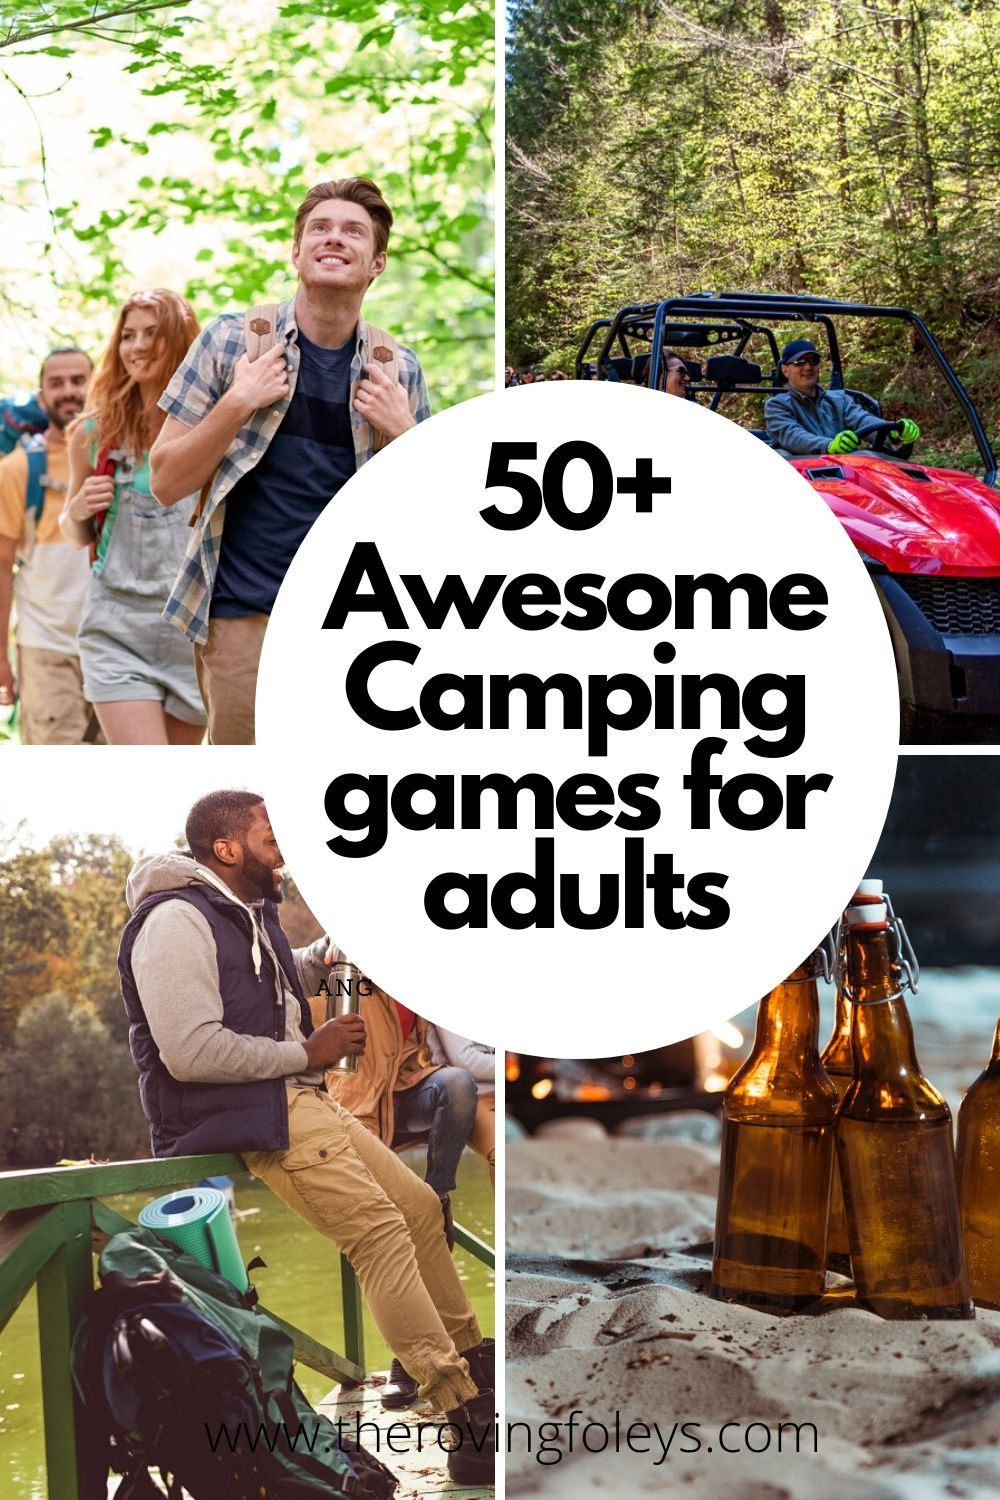 Fun Camping Ideas For Adults
 50 Fun Camping Activities For Adults To Help Ensure a Fun